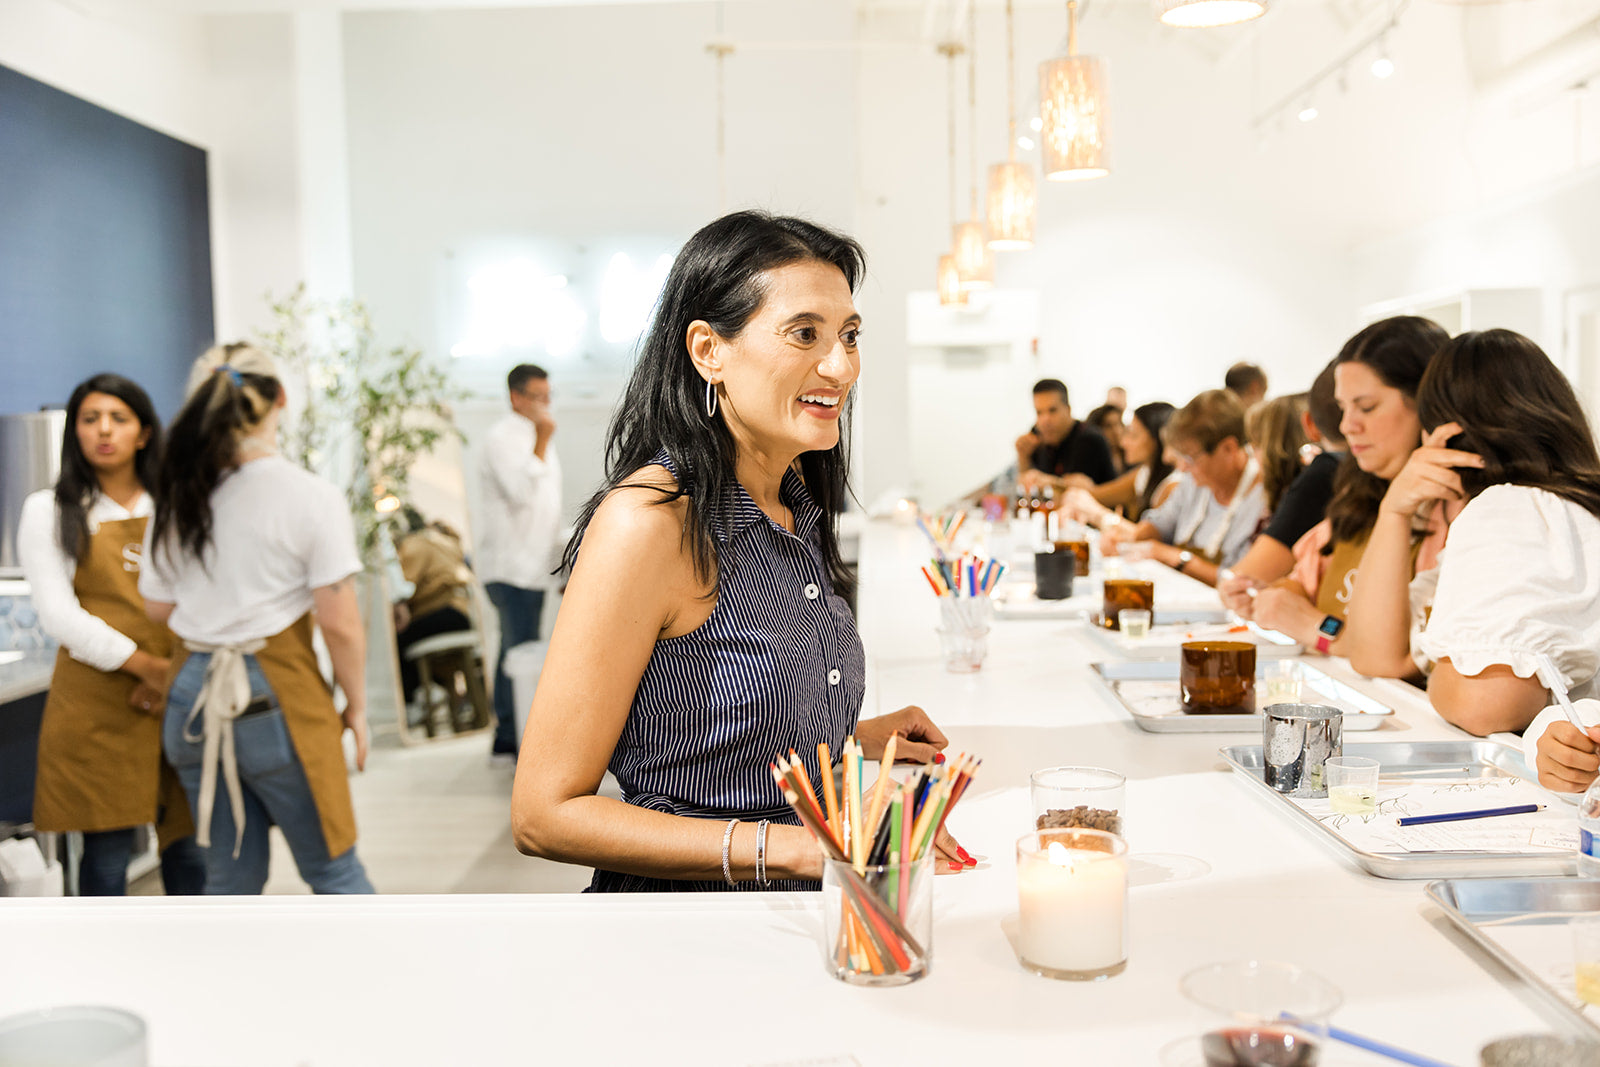 A smiling woman stands at the end of a long table filled with people engaged in a workshop or event in a bright, modern space.